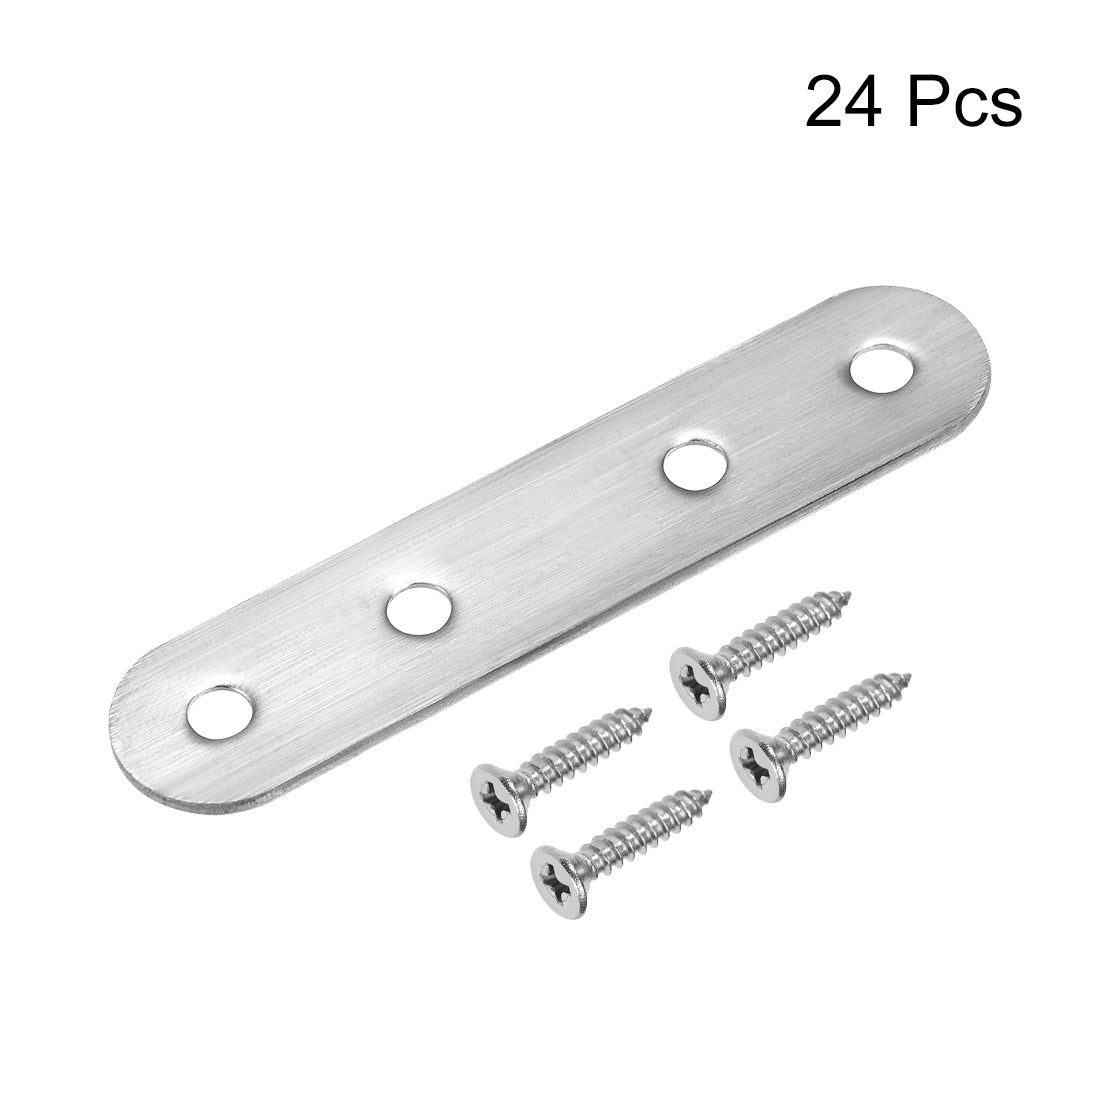 uxcell Uxcell Repair Plate, 80mm x 17mm, Flat Fixing Mending Bracket Connector with Screws, 24 Pcs